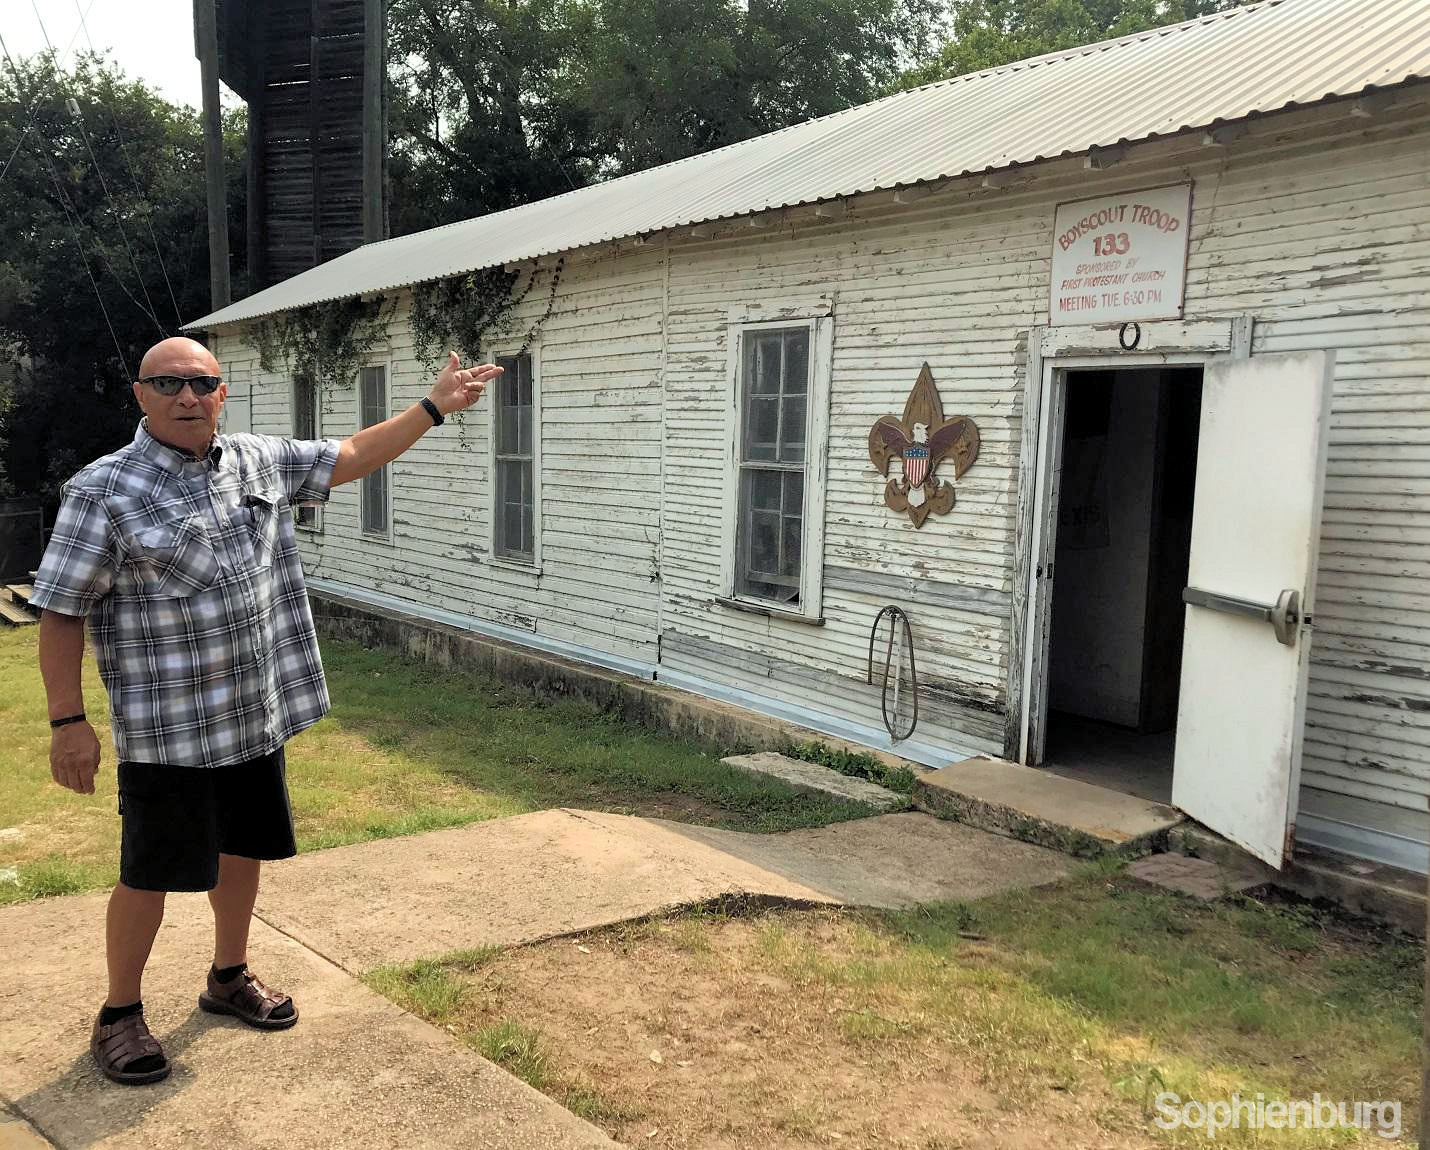 Juan Serda stands in front of the Troop 133 Scout Hut, historic school buildings (circa 1901-1950) that were relocated to Coll & Market in 1955. Serda remembers attending first grade in Mrs. Gillett’s class, and having math class in the old wooden structures.